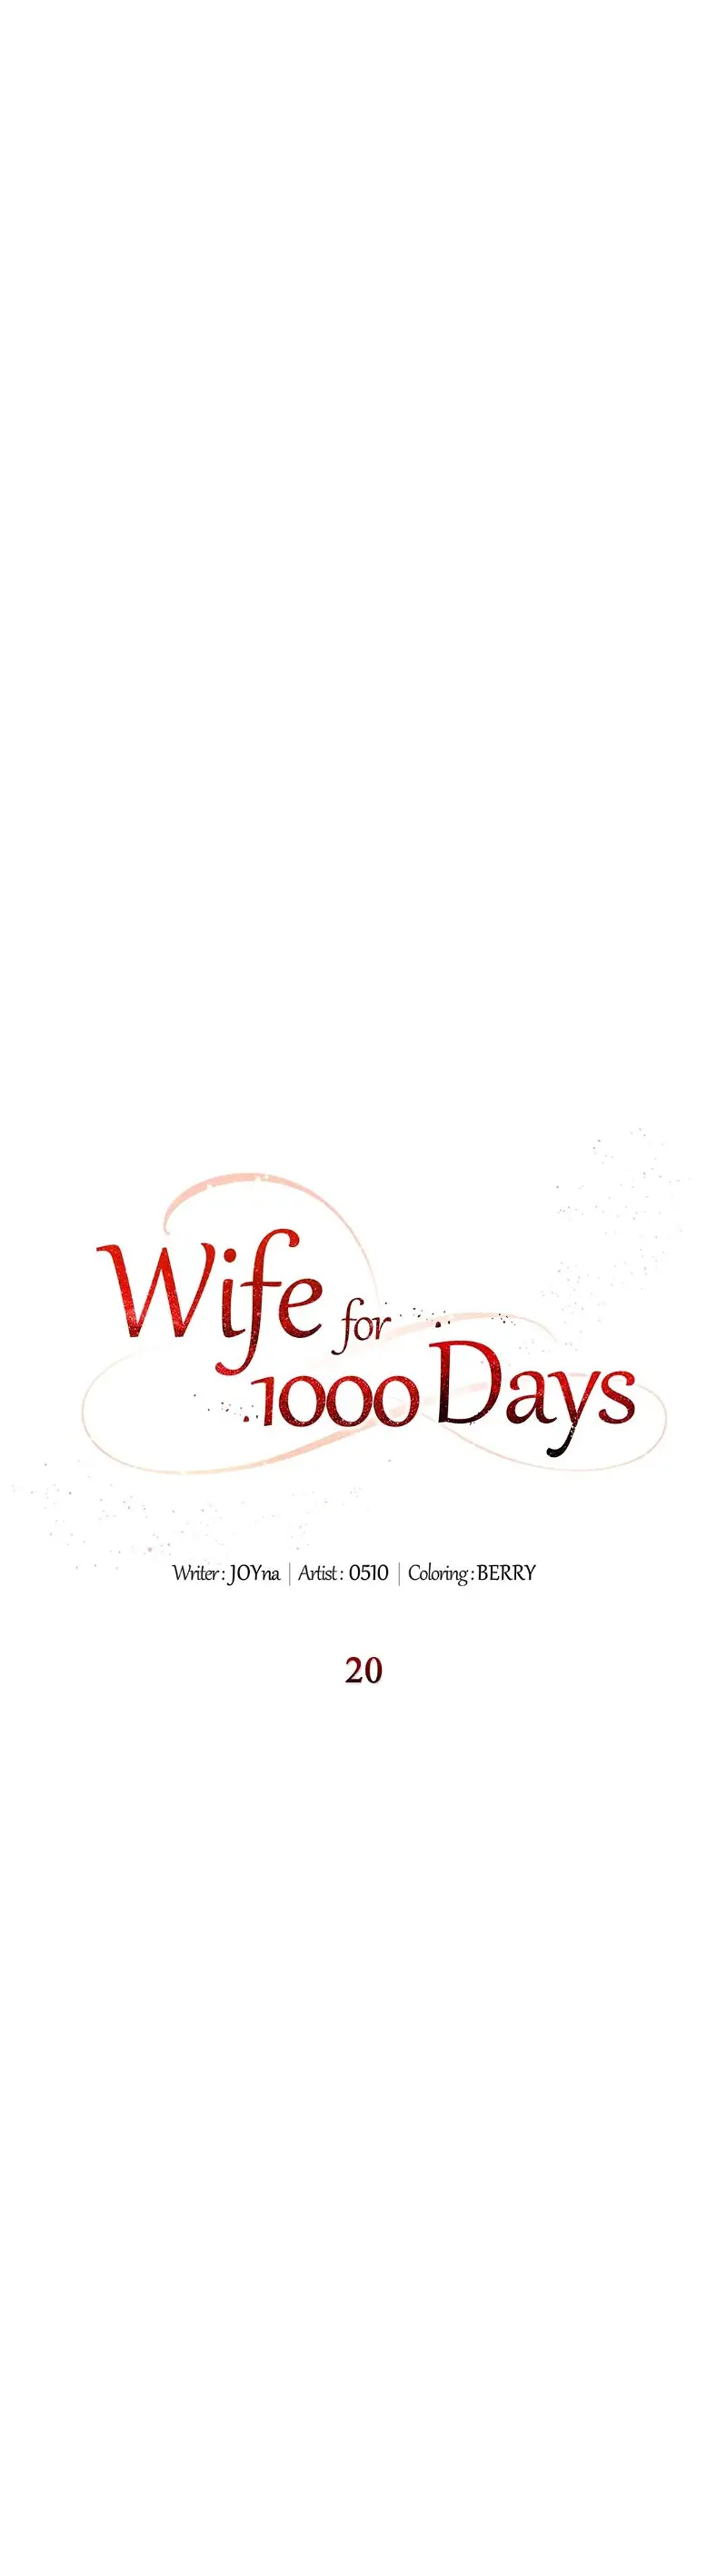 wife-for-1000-days-chap-20-11